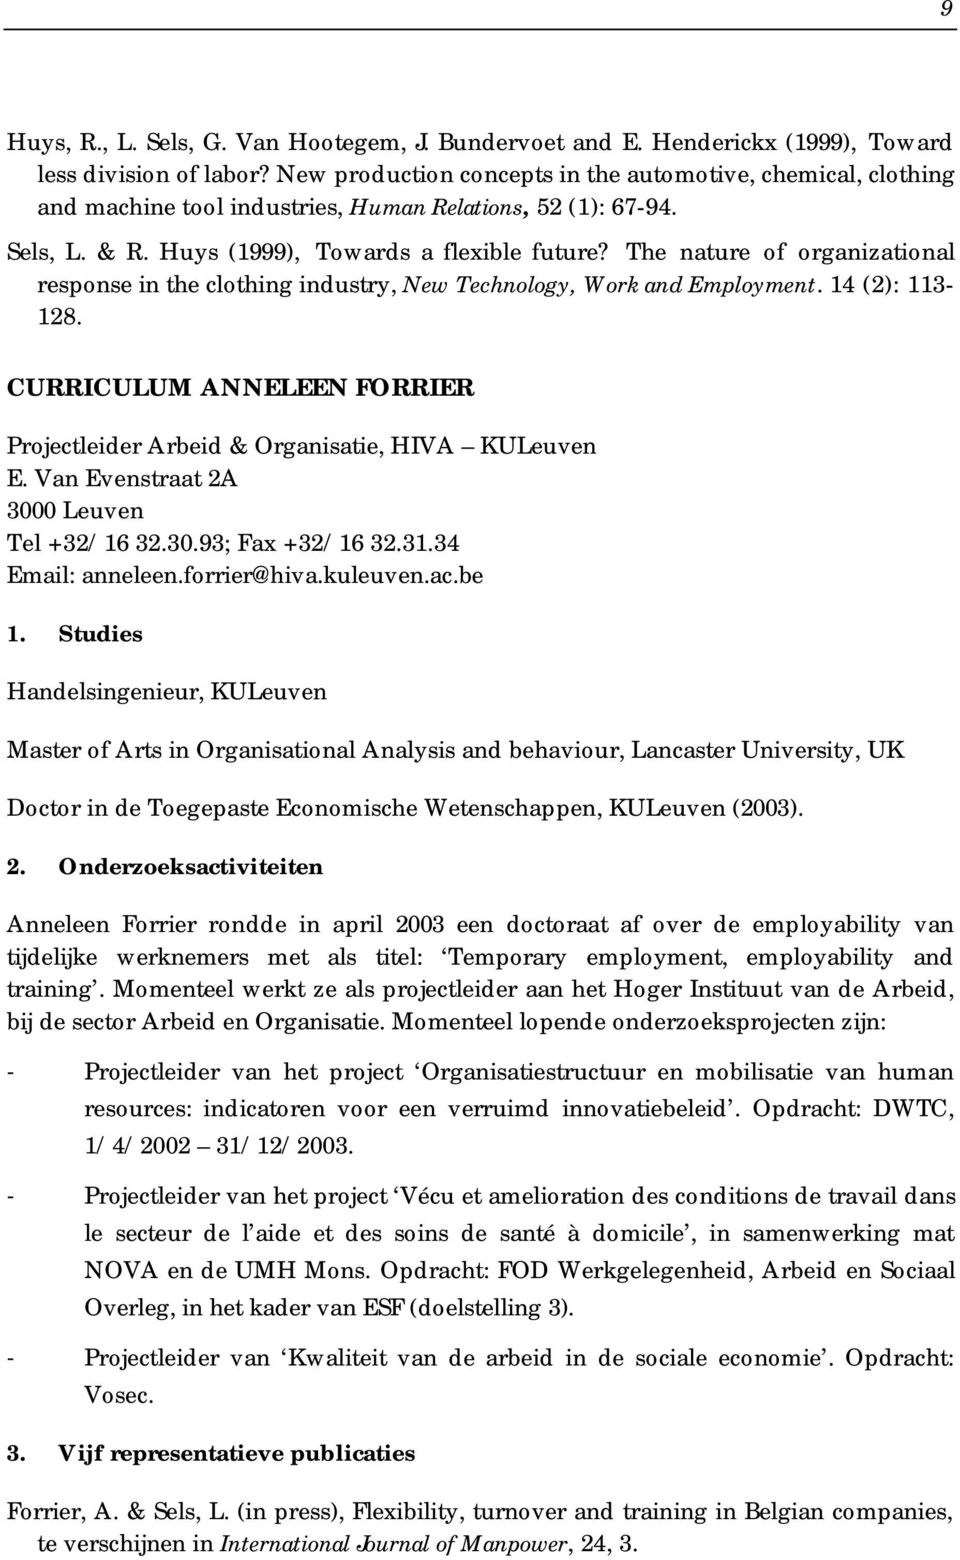 The nature of organizational response in the clothing industry, New Technology, Work and Employment. 14 (2): 113-128. CURRICULUM ANNELEEN FORRIER Projectleider Arbeid & Organisatie, HIVA KULeuven E.